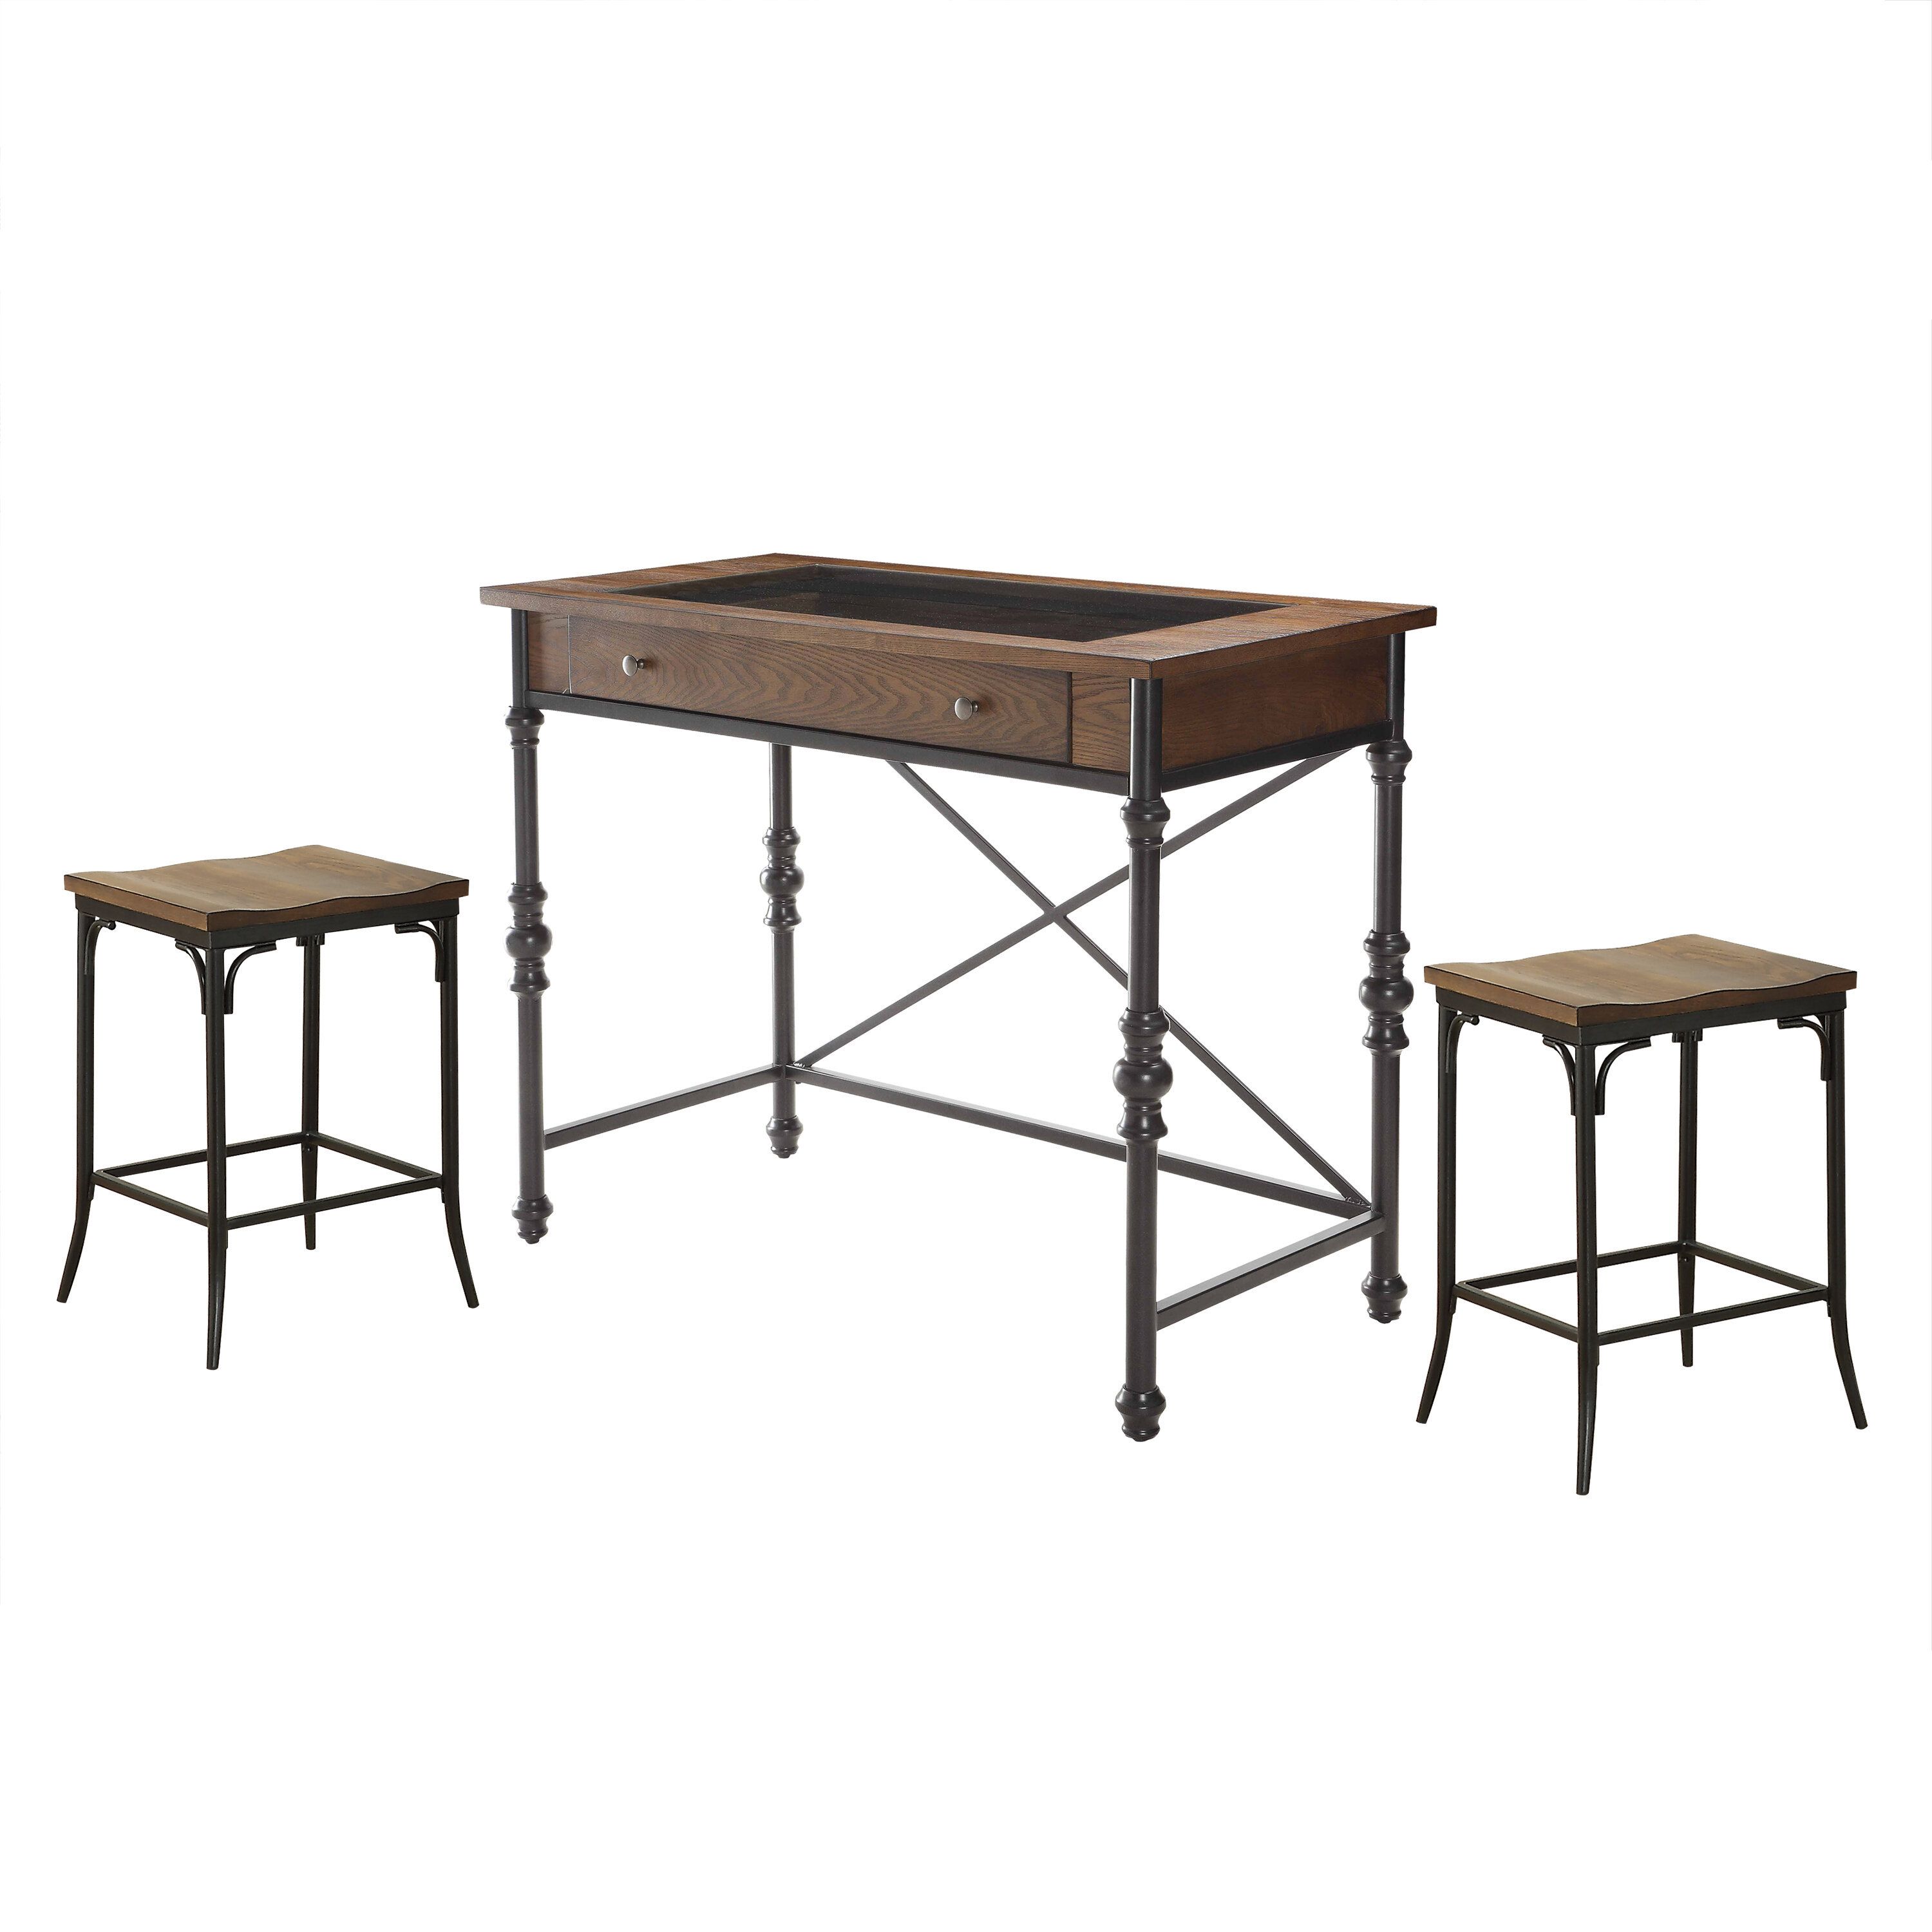 Fashionable Maloney 3 Piece Breakfast Nook Dining Sets Within Gracie Oaks Manriquez 3 Piece Pub Table Set (View 18 of 20)